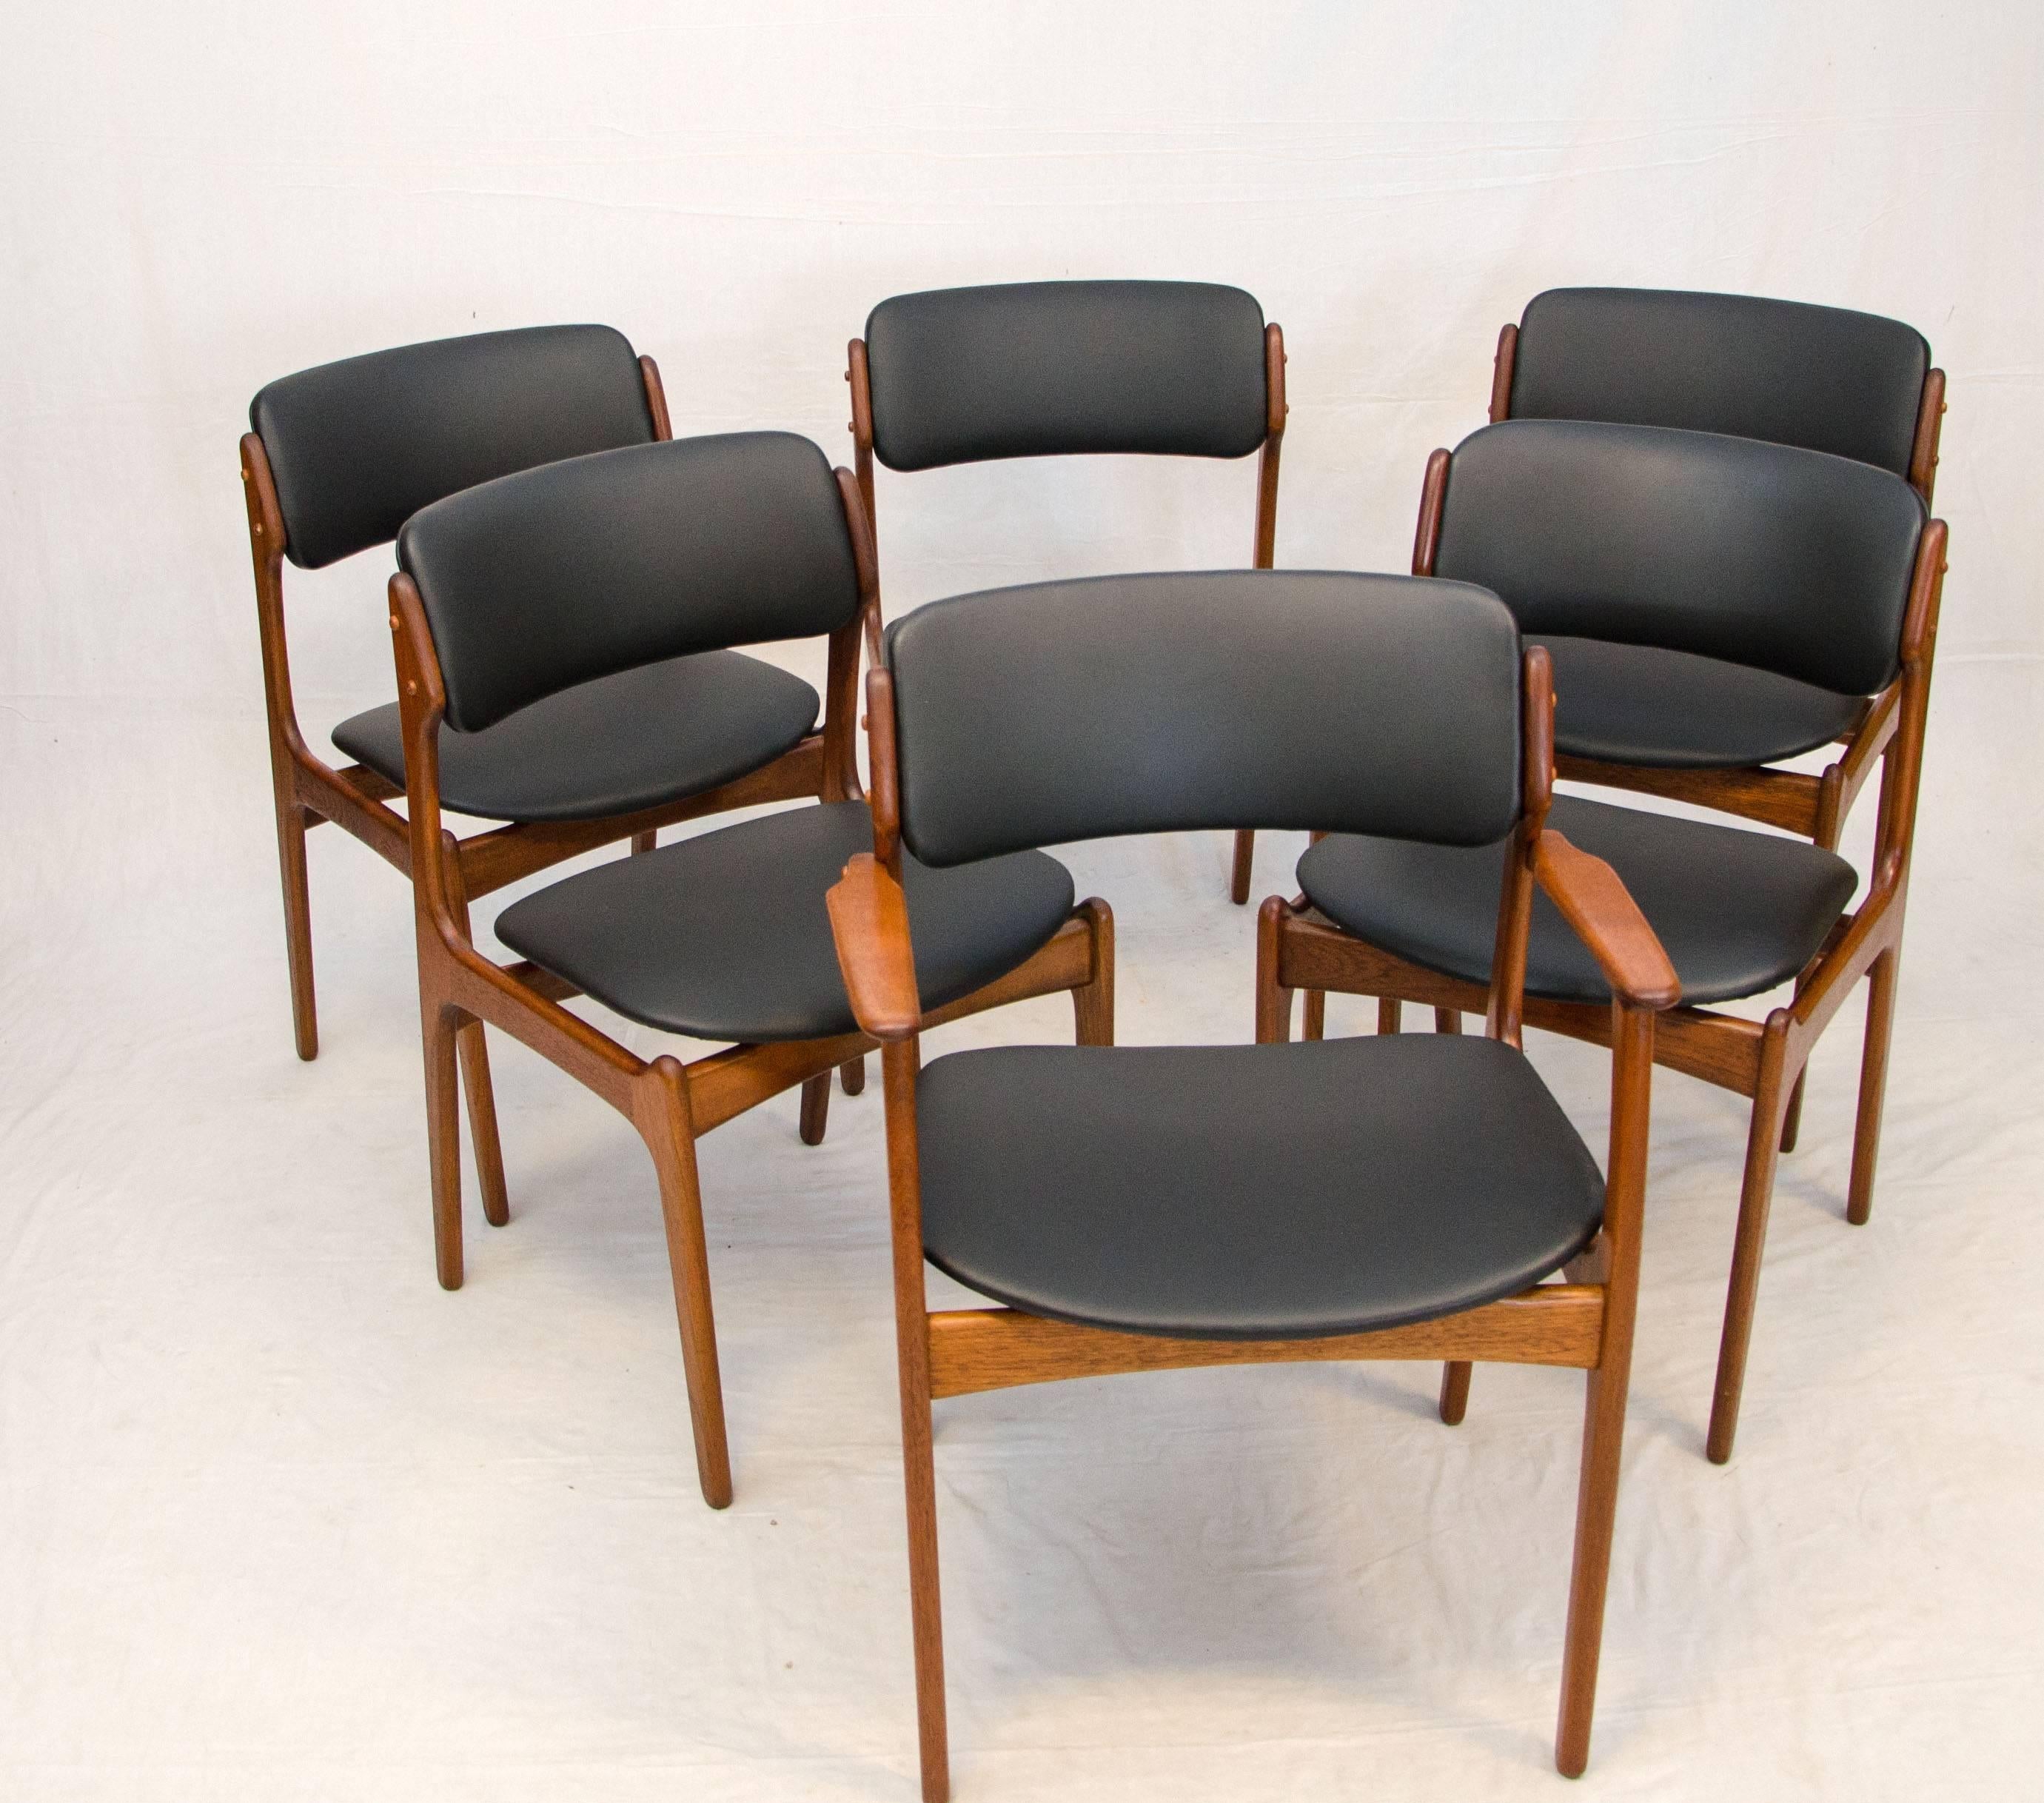 Nice set of six Danish teak dining chairs designed by Erik Buck and manufactured by O. D. Møbler. The chairs are very comfortable with an upholstered back and a floating seat. Chairs have new faux leather upholstery, as was original, faux leather is